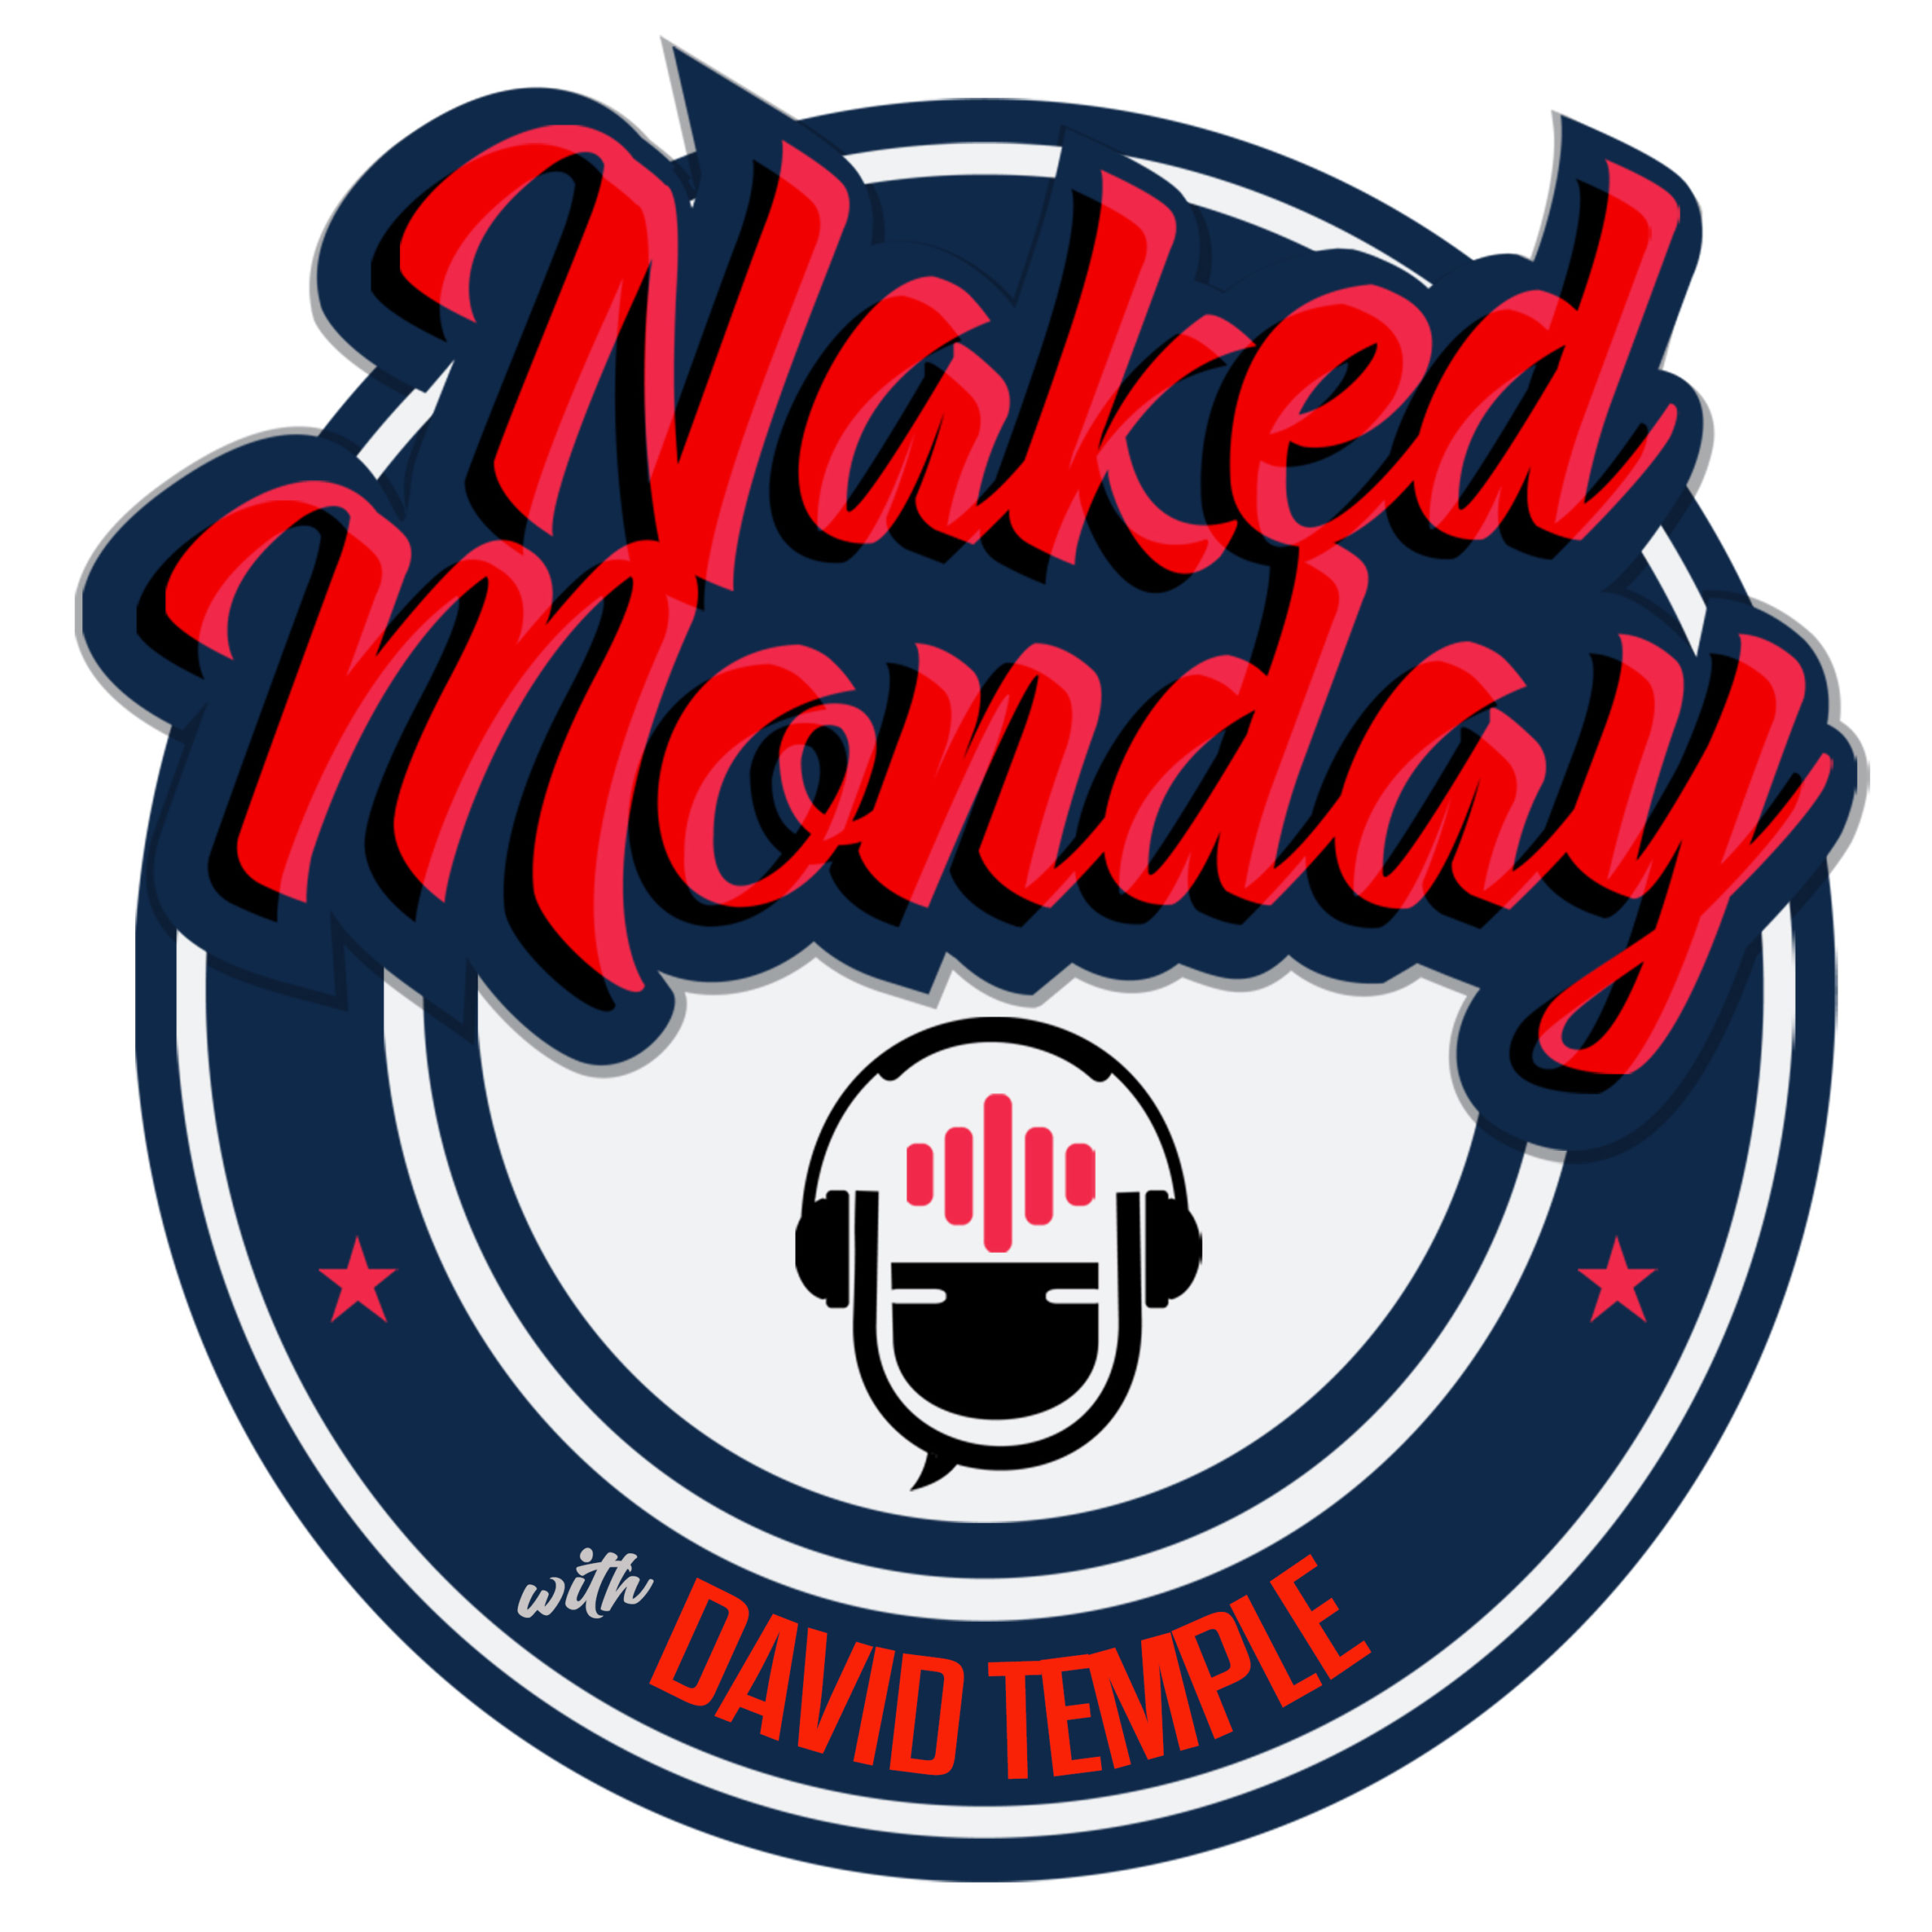 Naked Monday with David Temple